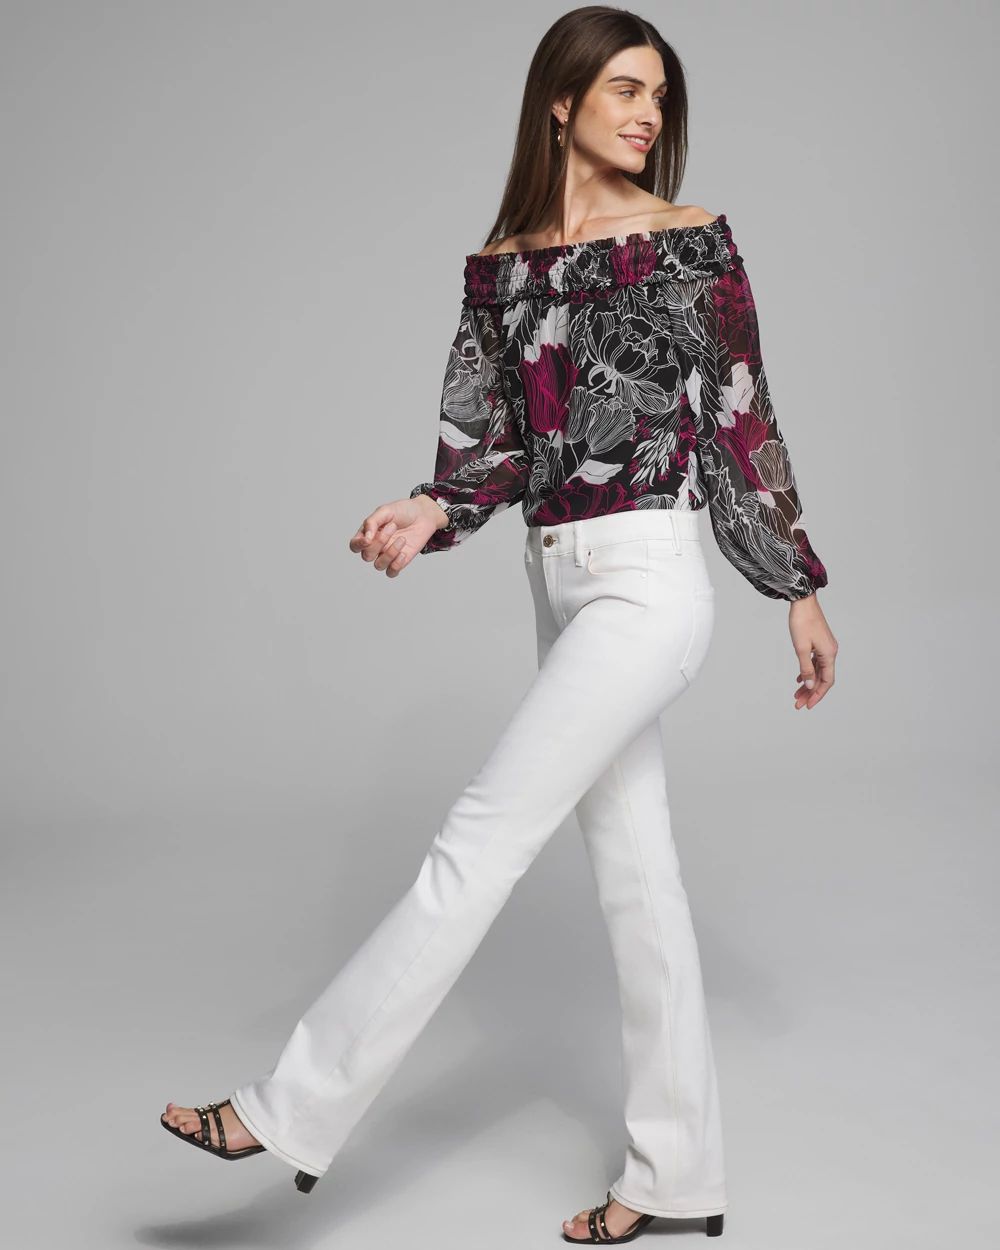 Outlet WHBM Off-The-Shoulder Chiffon Blouse click to view larger image.